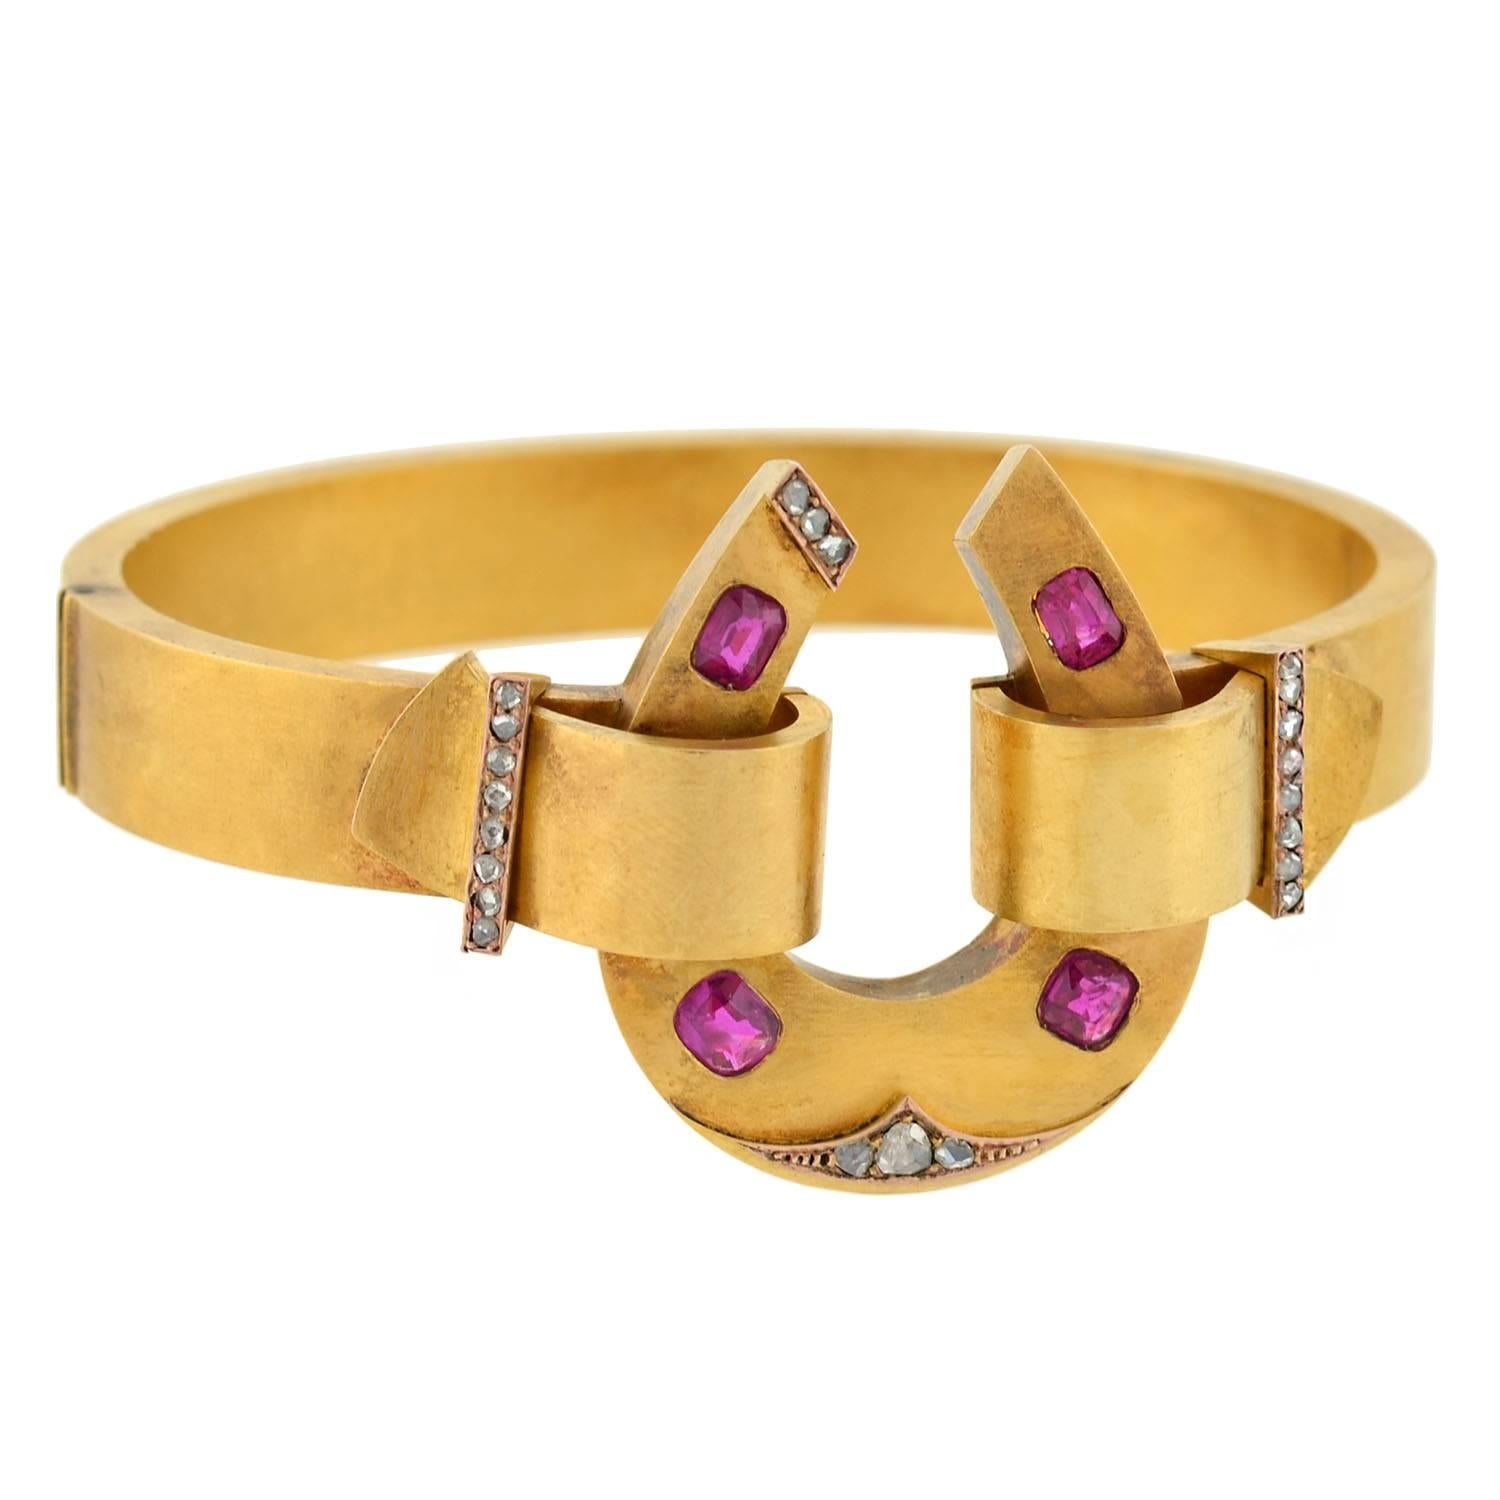 An outstanding horseshoe bracelet from the Victorian (ca1880) era! This incredible 3-dimensional bangle is crafted in vibrant 18kt gold, and is quite substantial in both size and appearance. A large open horseshoe rests at the center, grasped